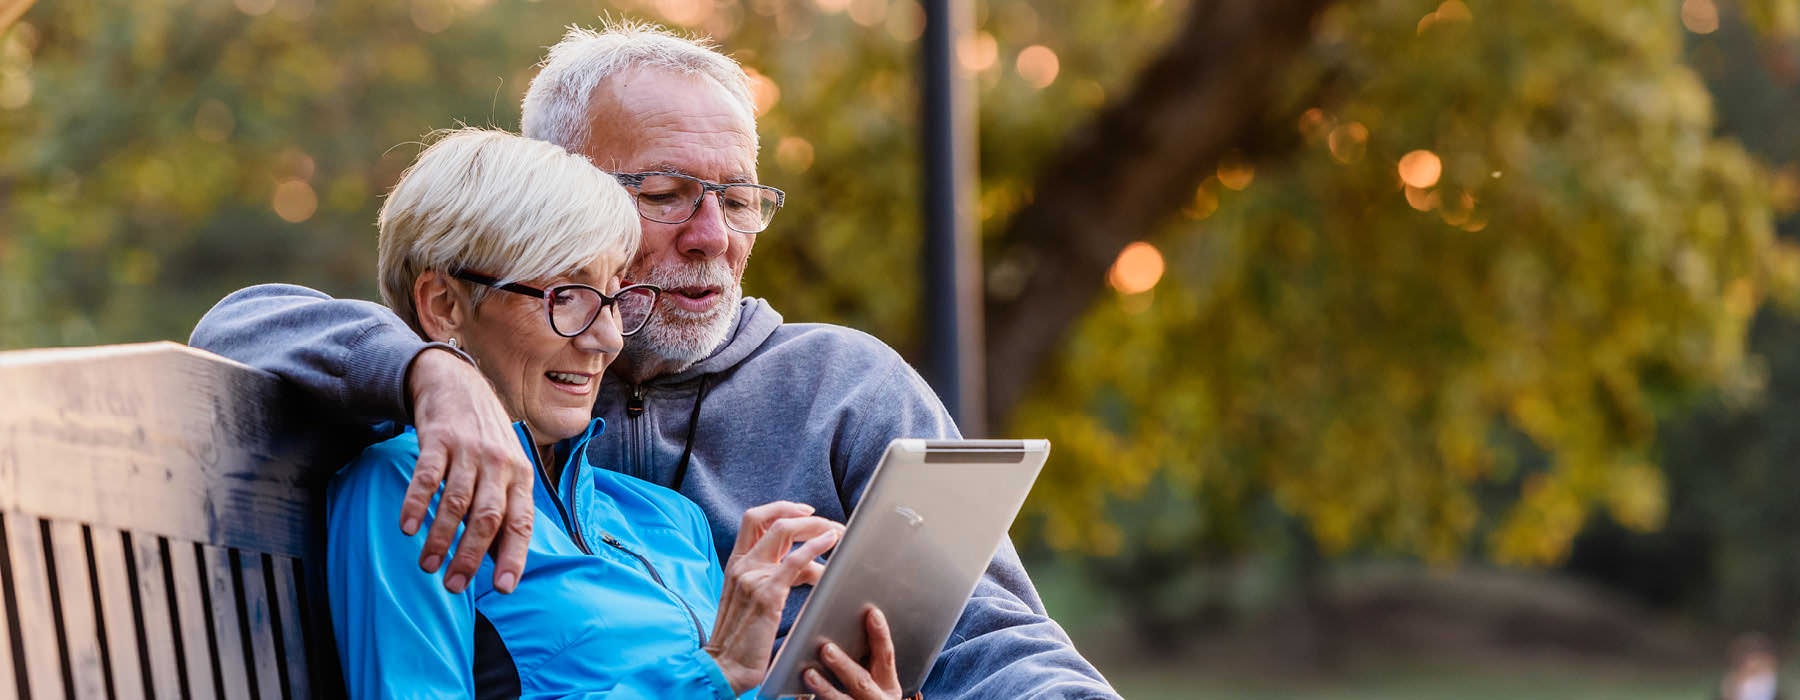 elderly couple look at their e-pad on park bench